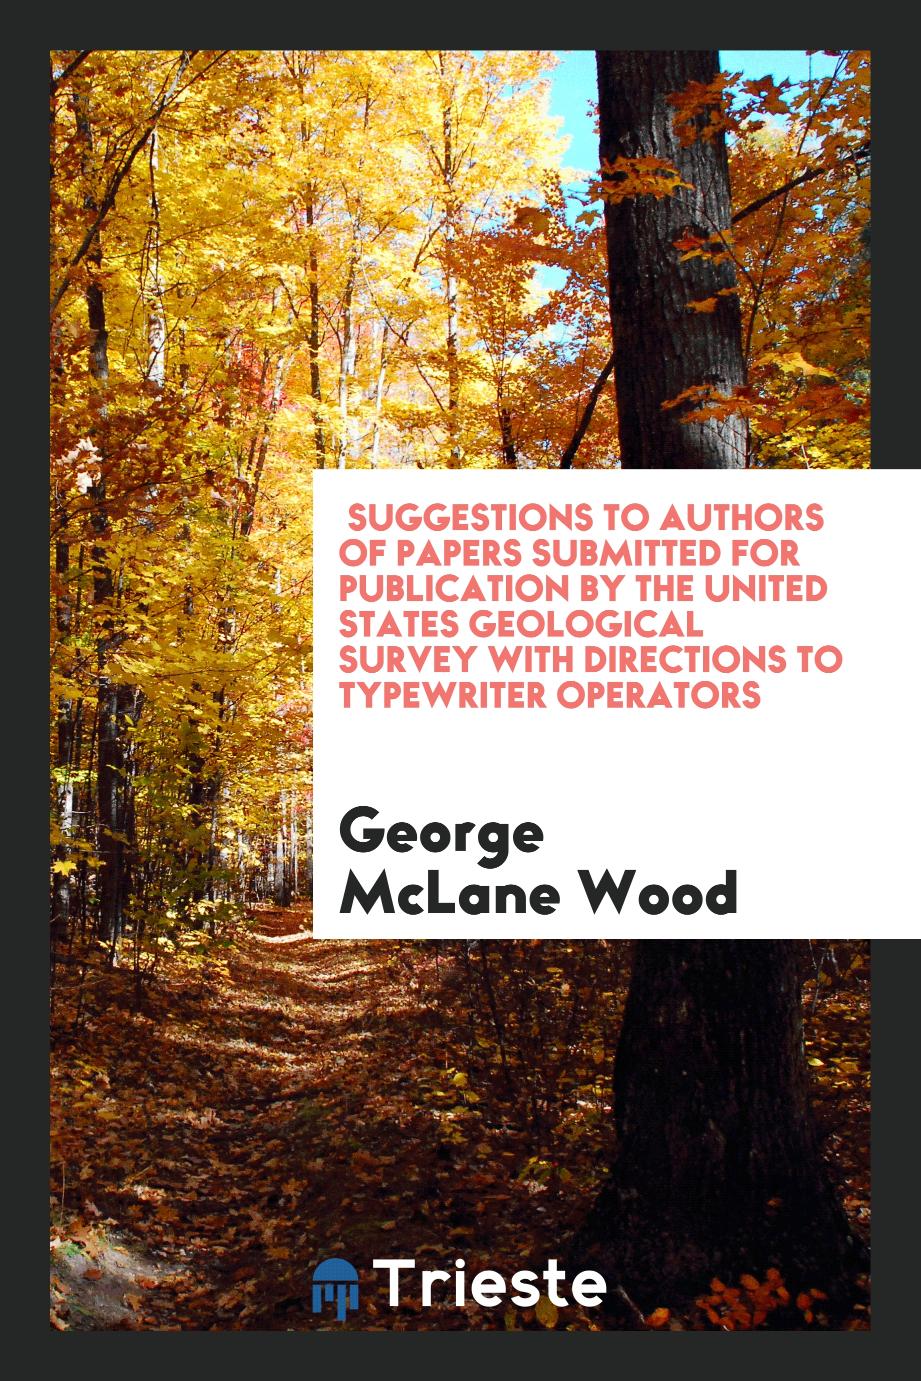 Suggestions to authors of papers submitted for publication by the United States Geological Survey with directions to typewriter operators